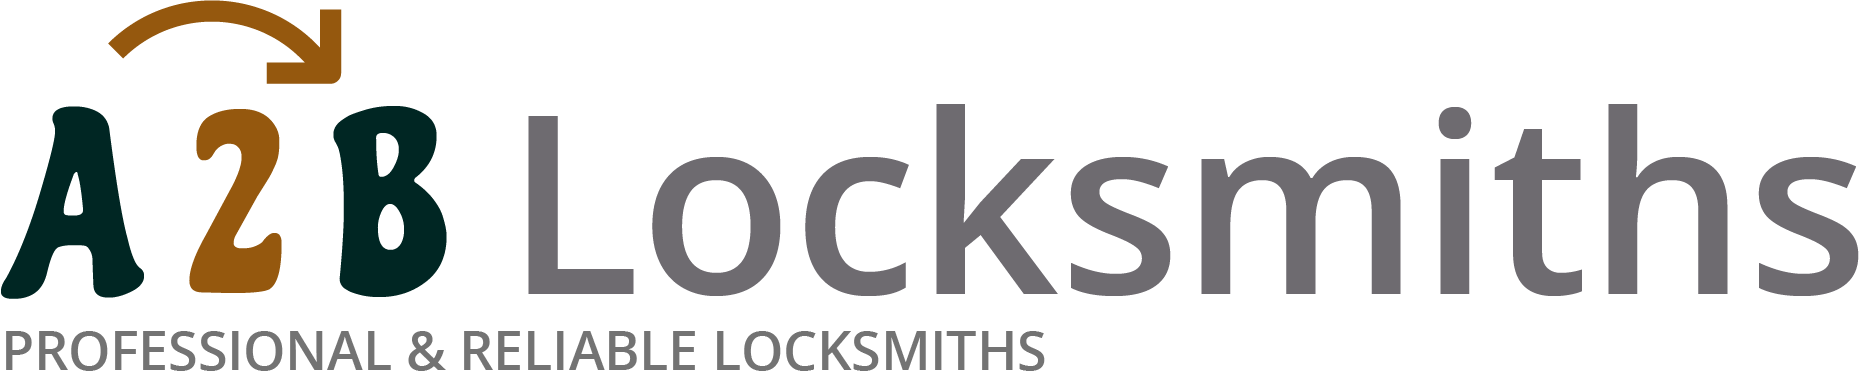 If you are locked out of house in Broadstone, our 24/7 local emergency locksmith services can help you.